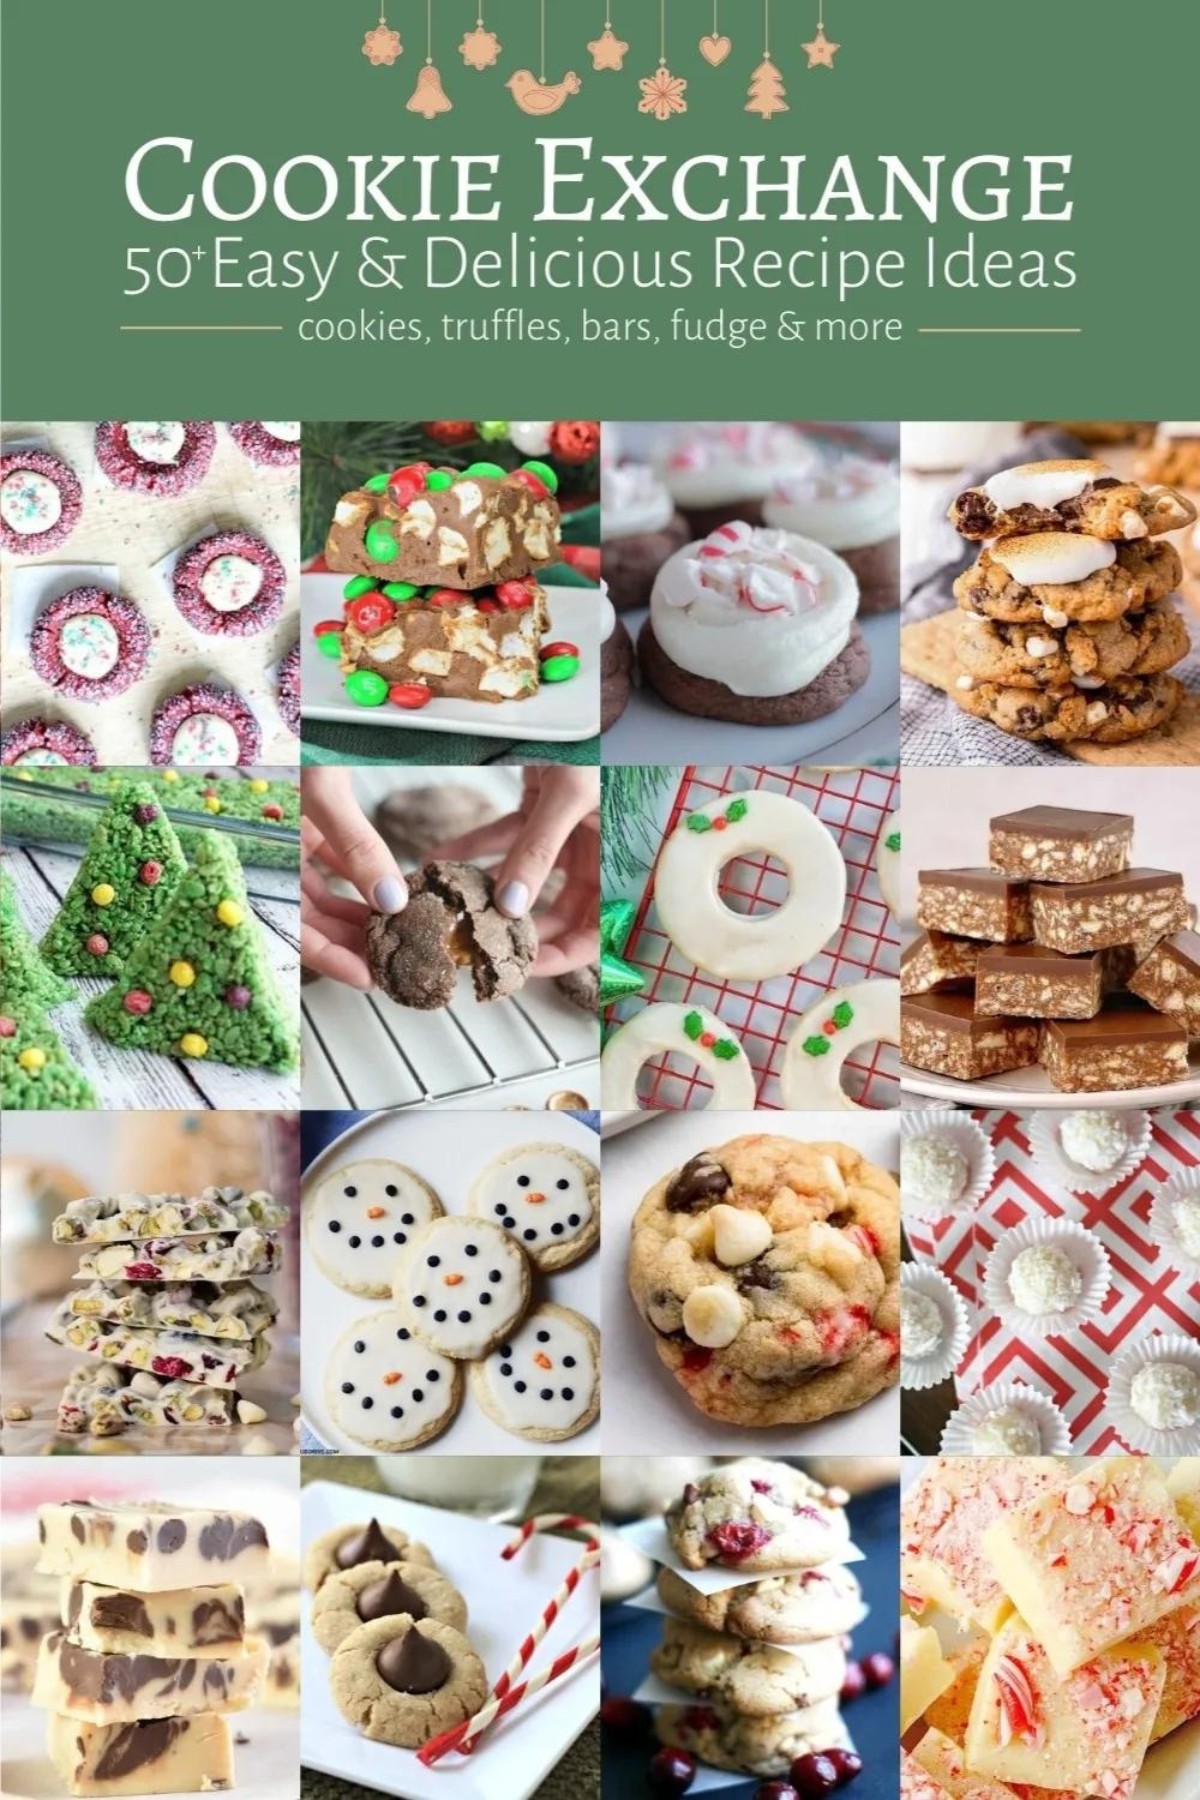 Cookie Exchange Recipes for the Holidays